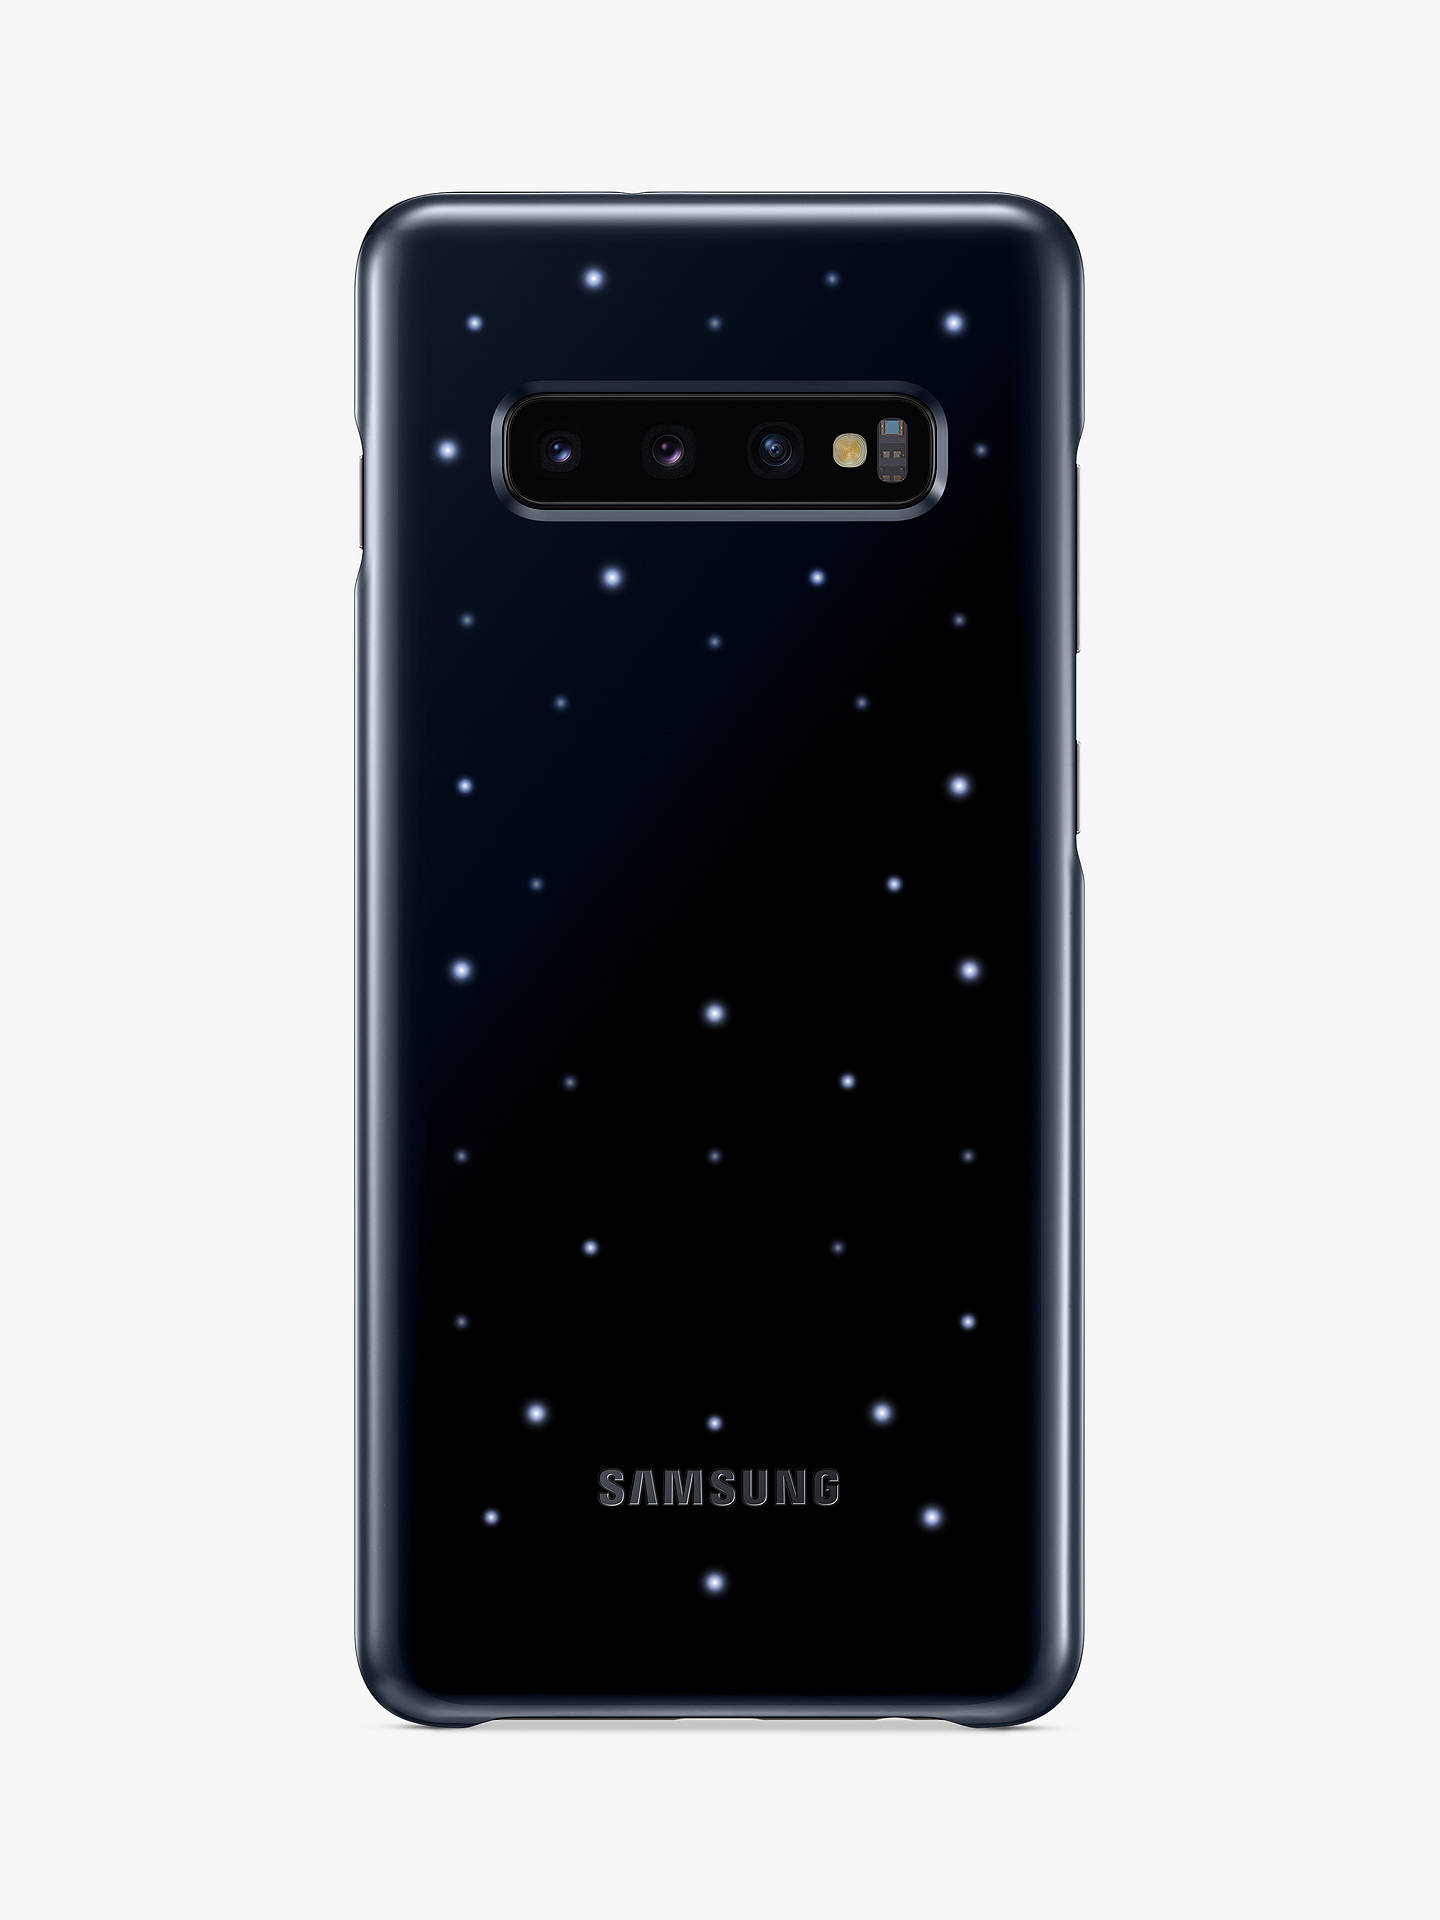 Samsung Galaxy S10 LED Back Cover, Black at John Lewis & Partners